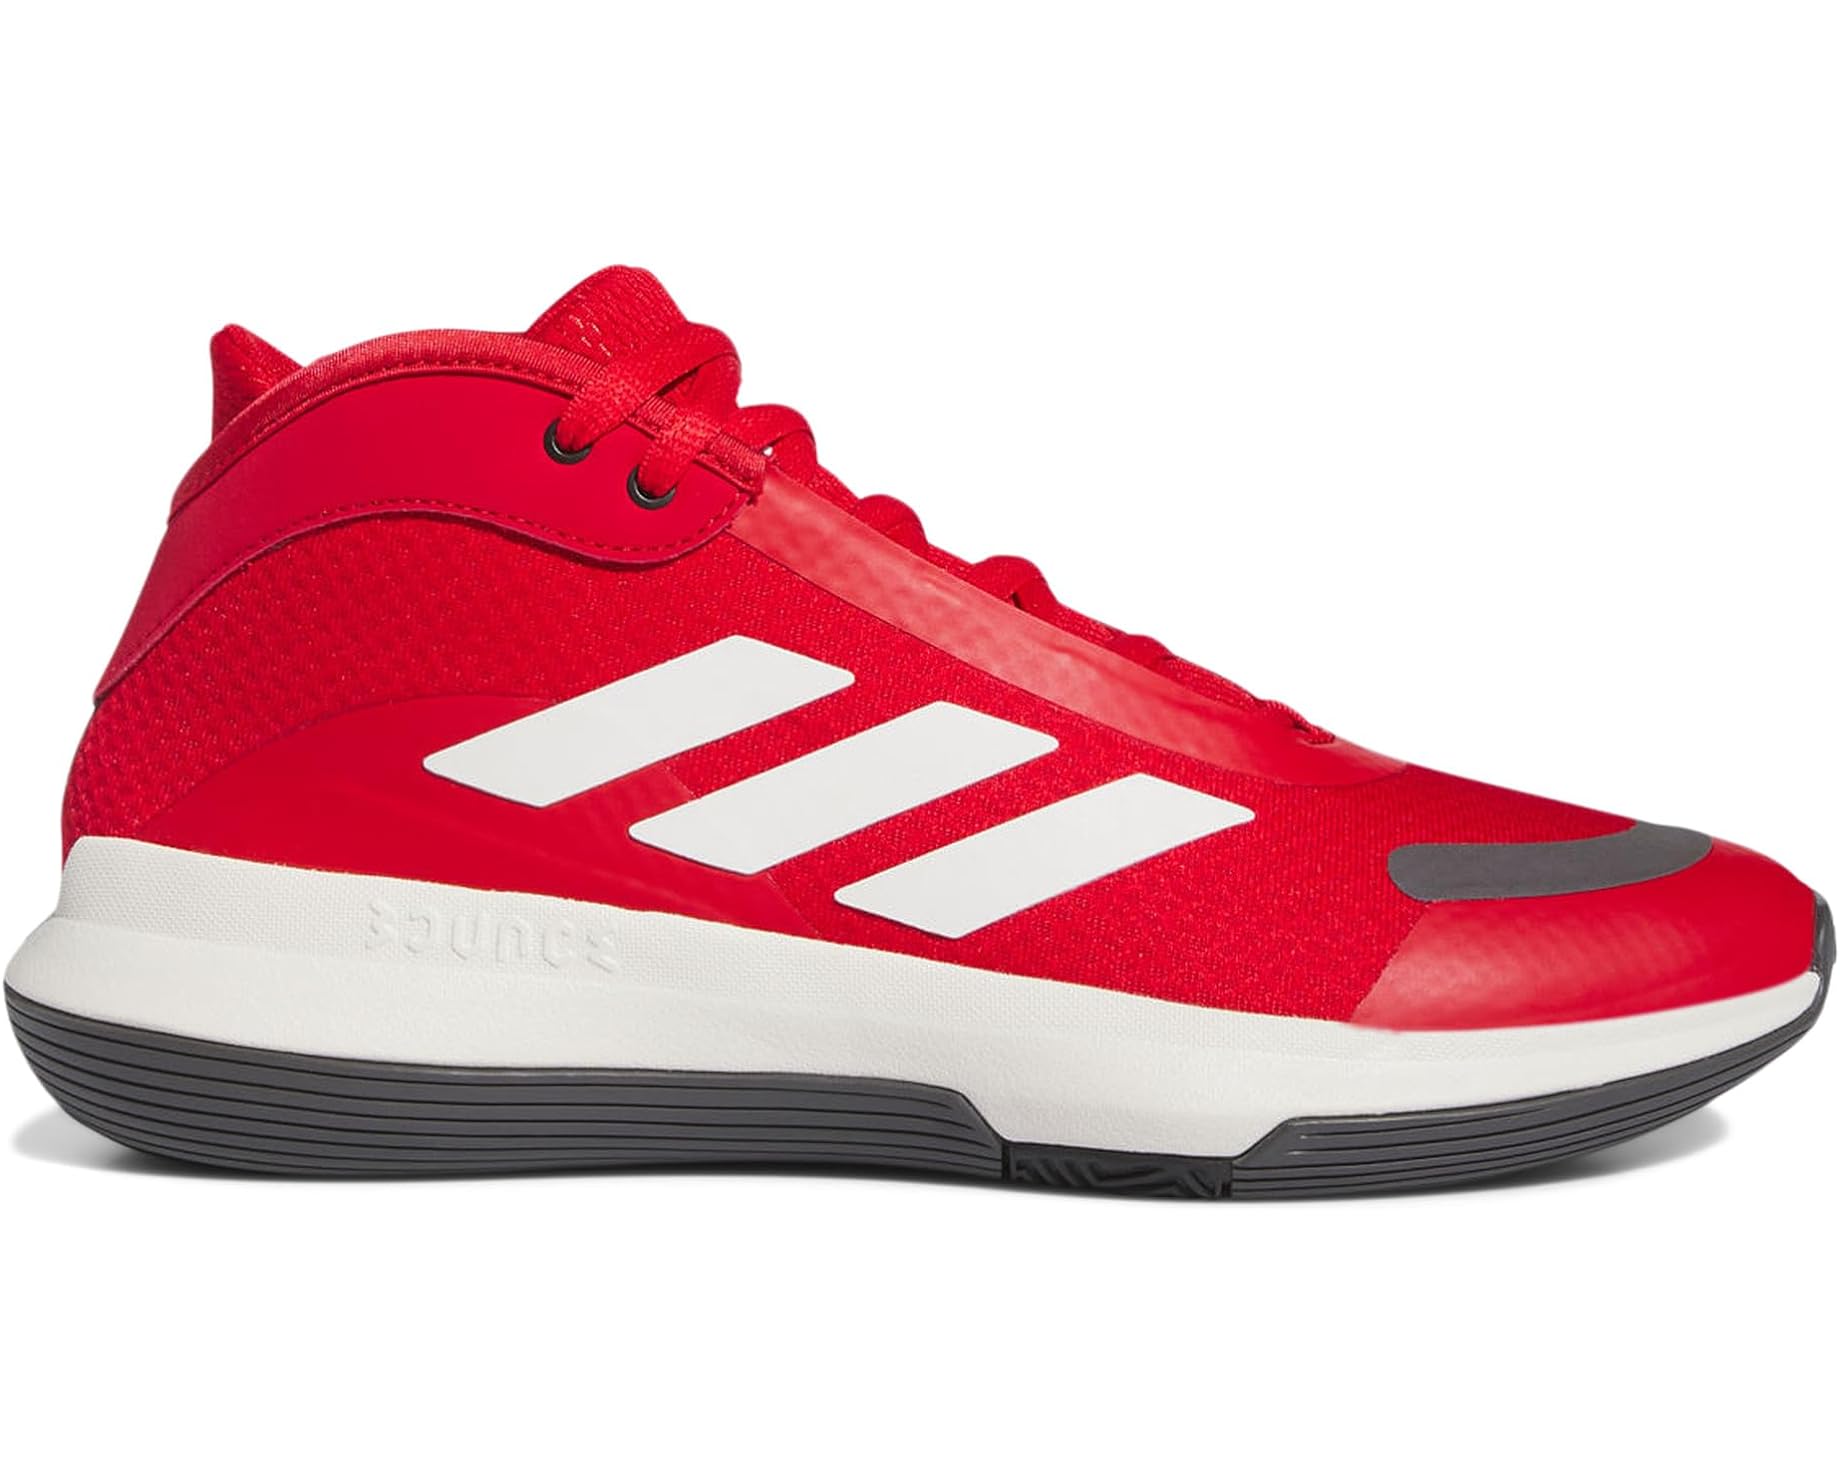 adidas Men's or Women's Bounce Legends Shoes (Better Scarlet/Cloud White/Charcoal) $51 + Free Shipping